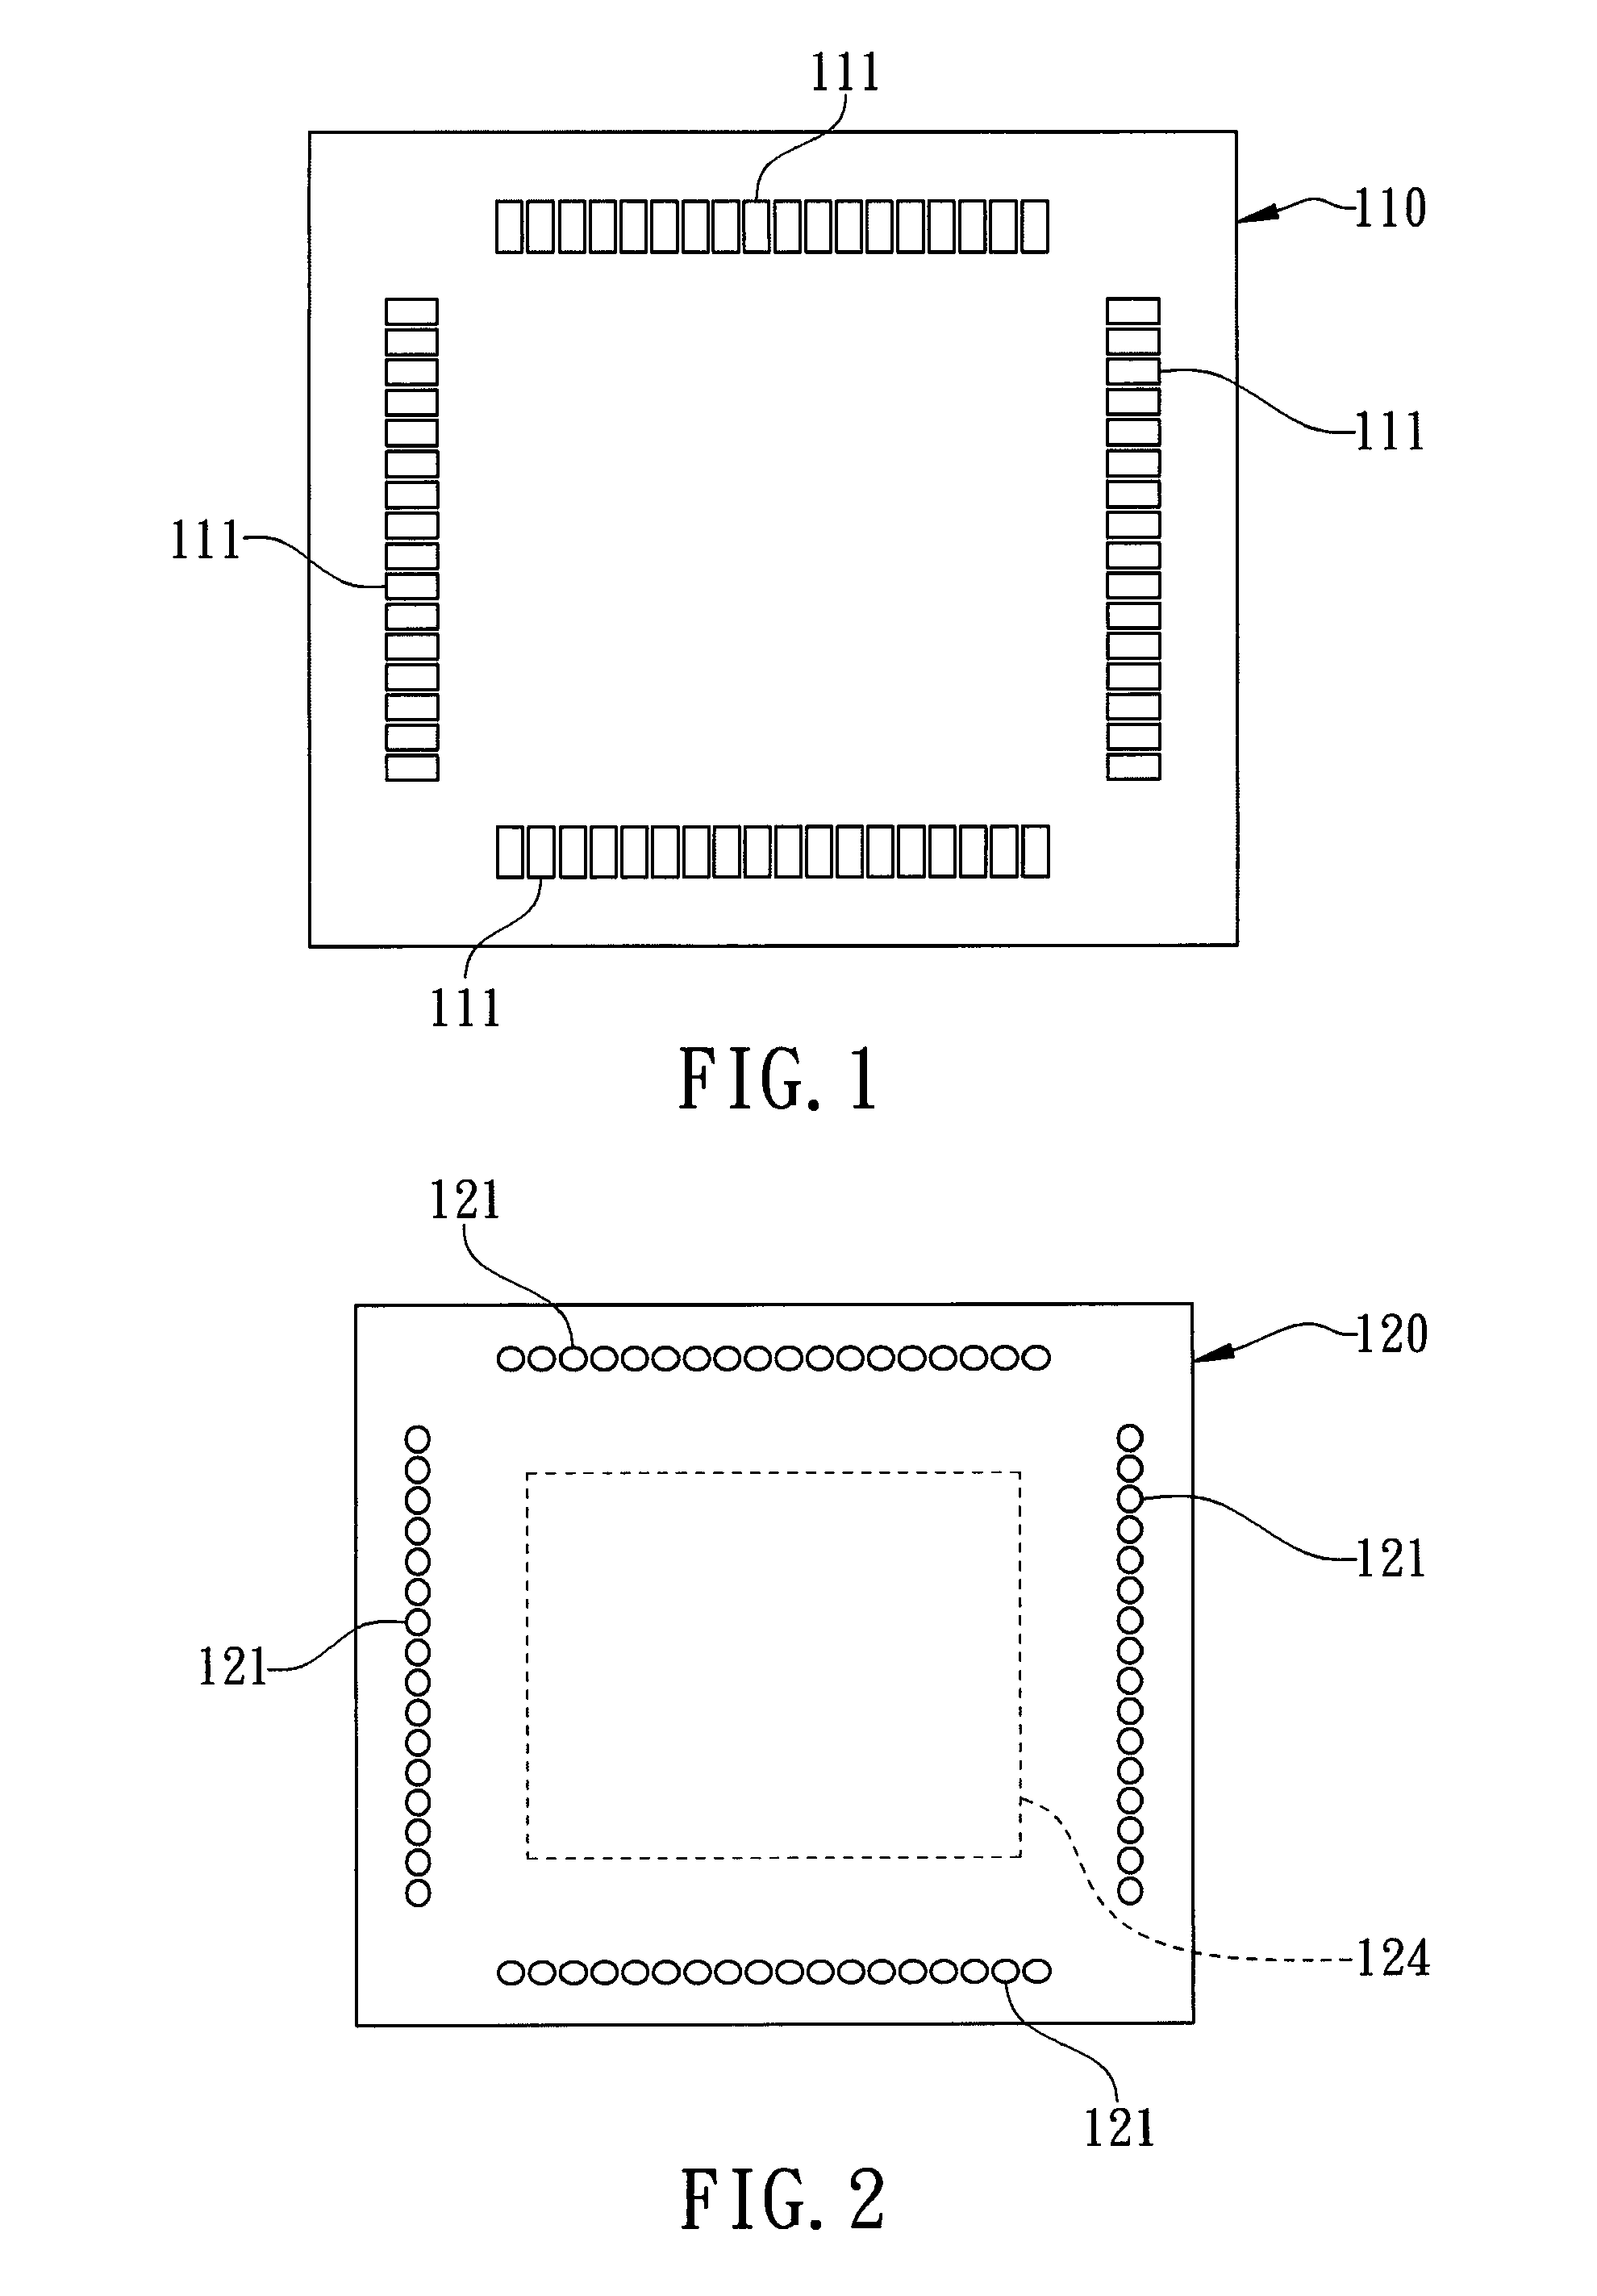 Flip chip device having soldered metal posts by surface mounting